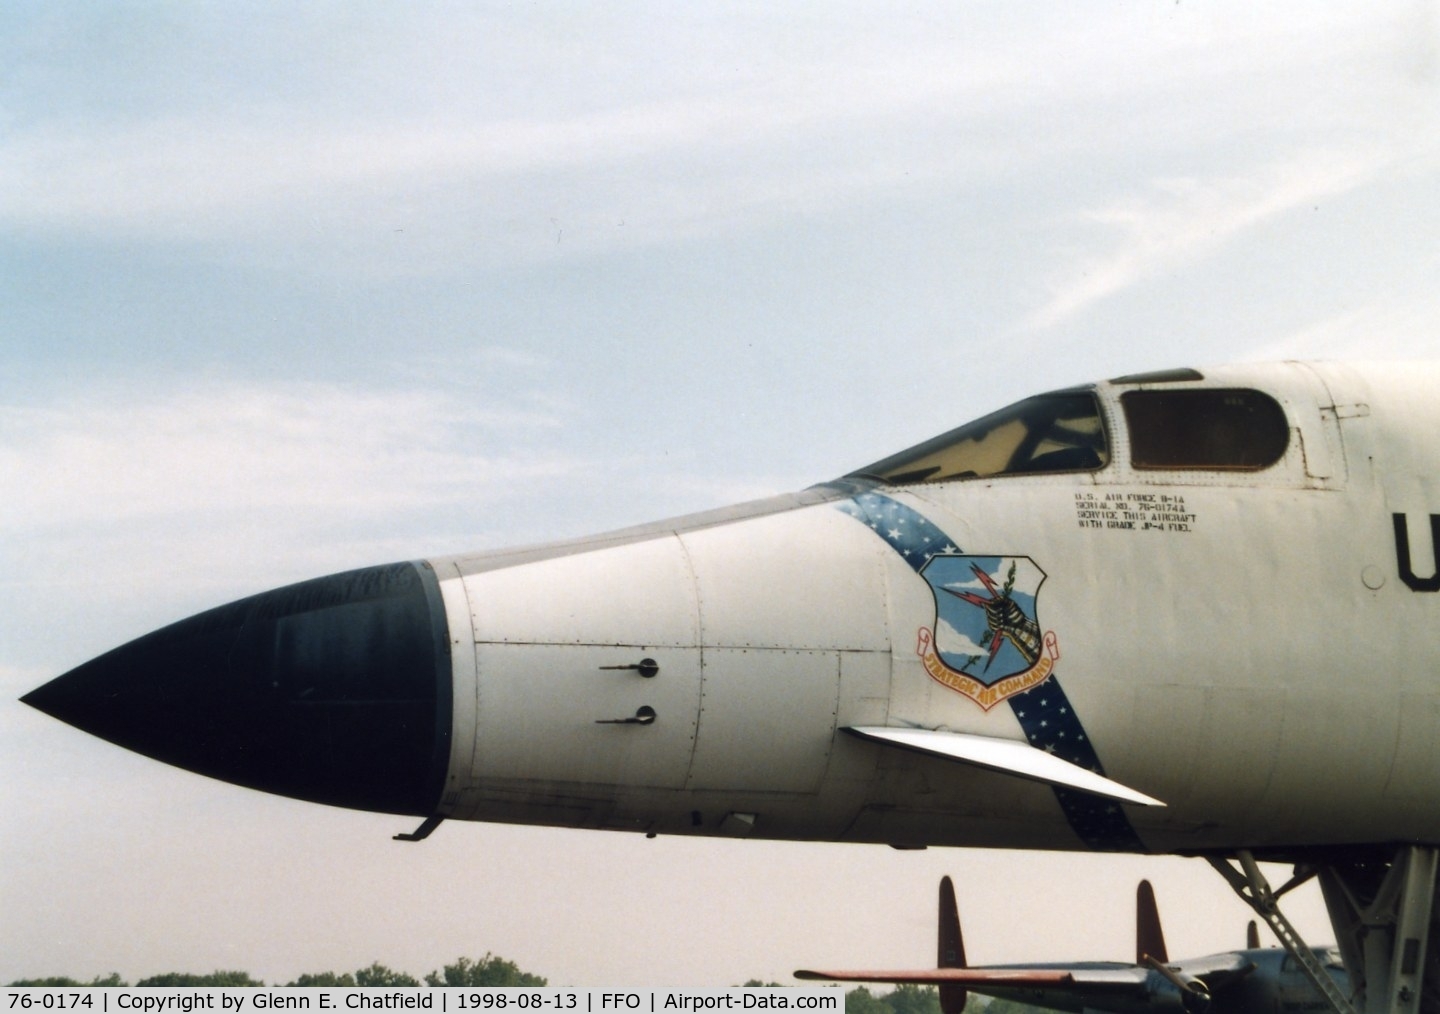 76-0174, 1976 Rockwell B-1A Lancer C/N 004, B-1A when at the National Museum of the U.S. Air Force